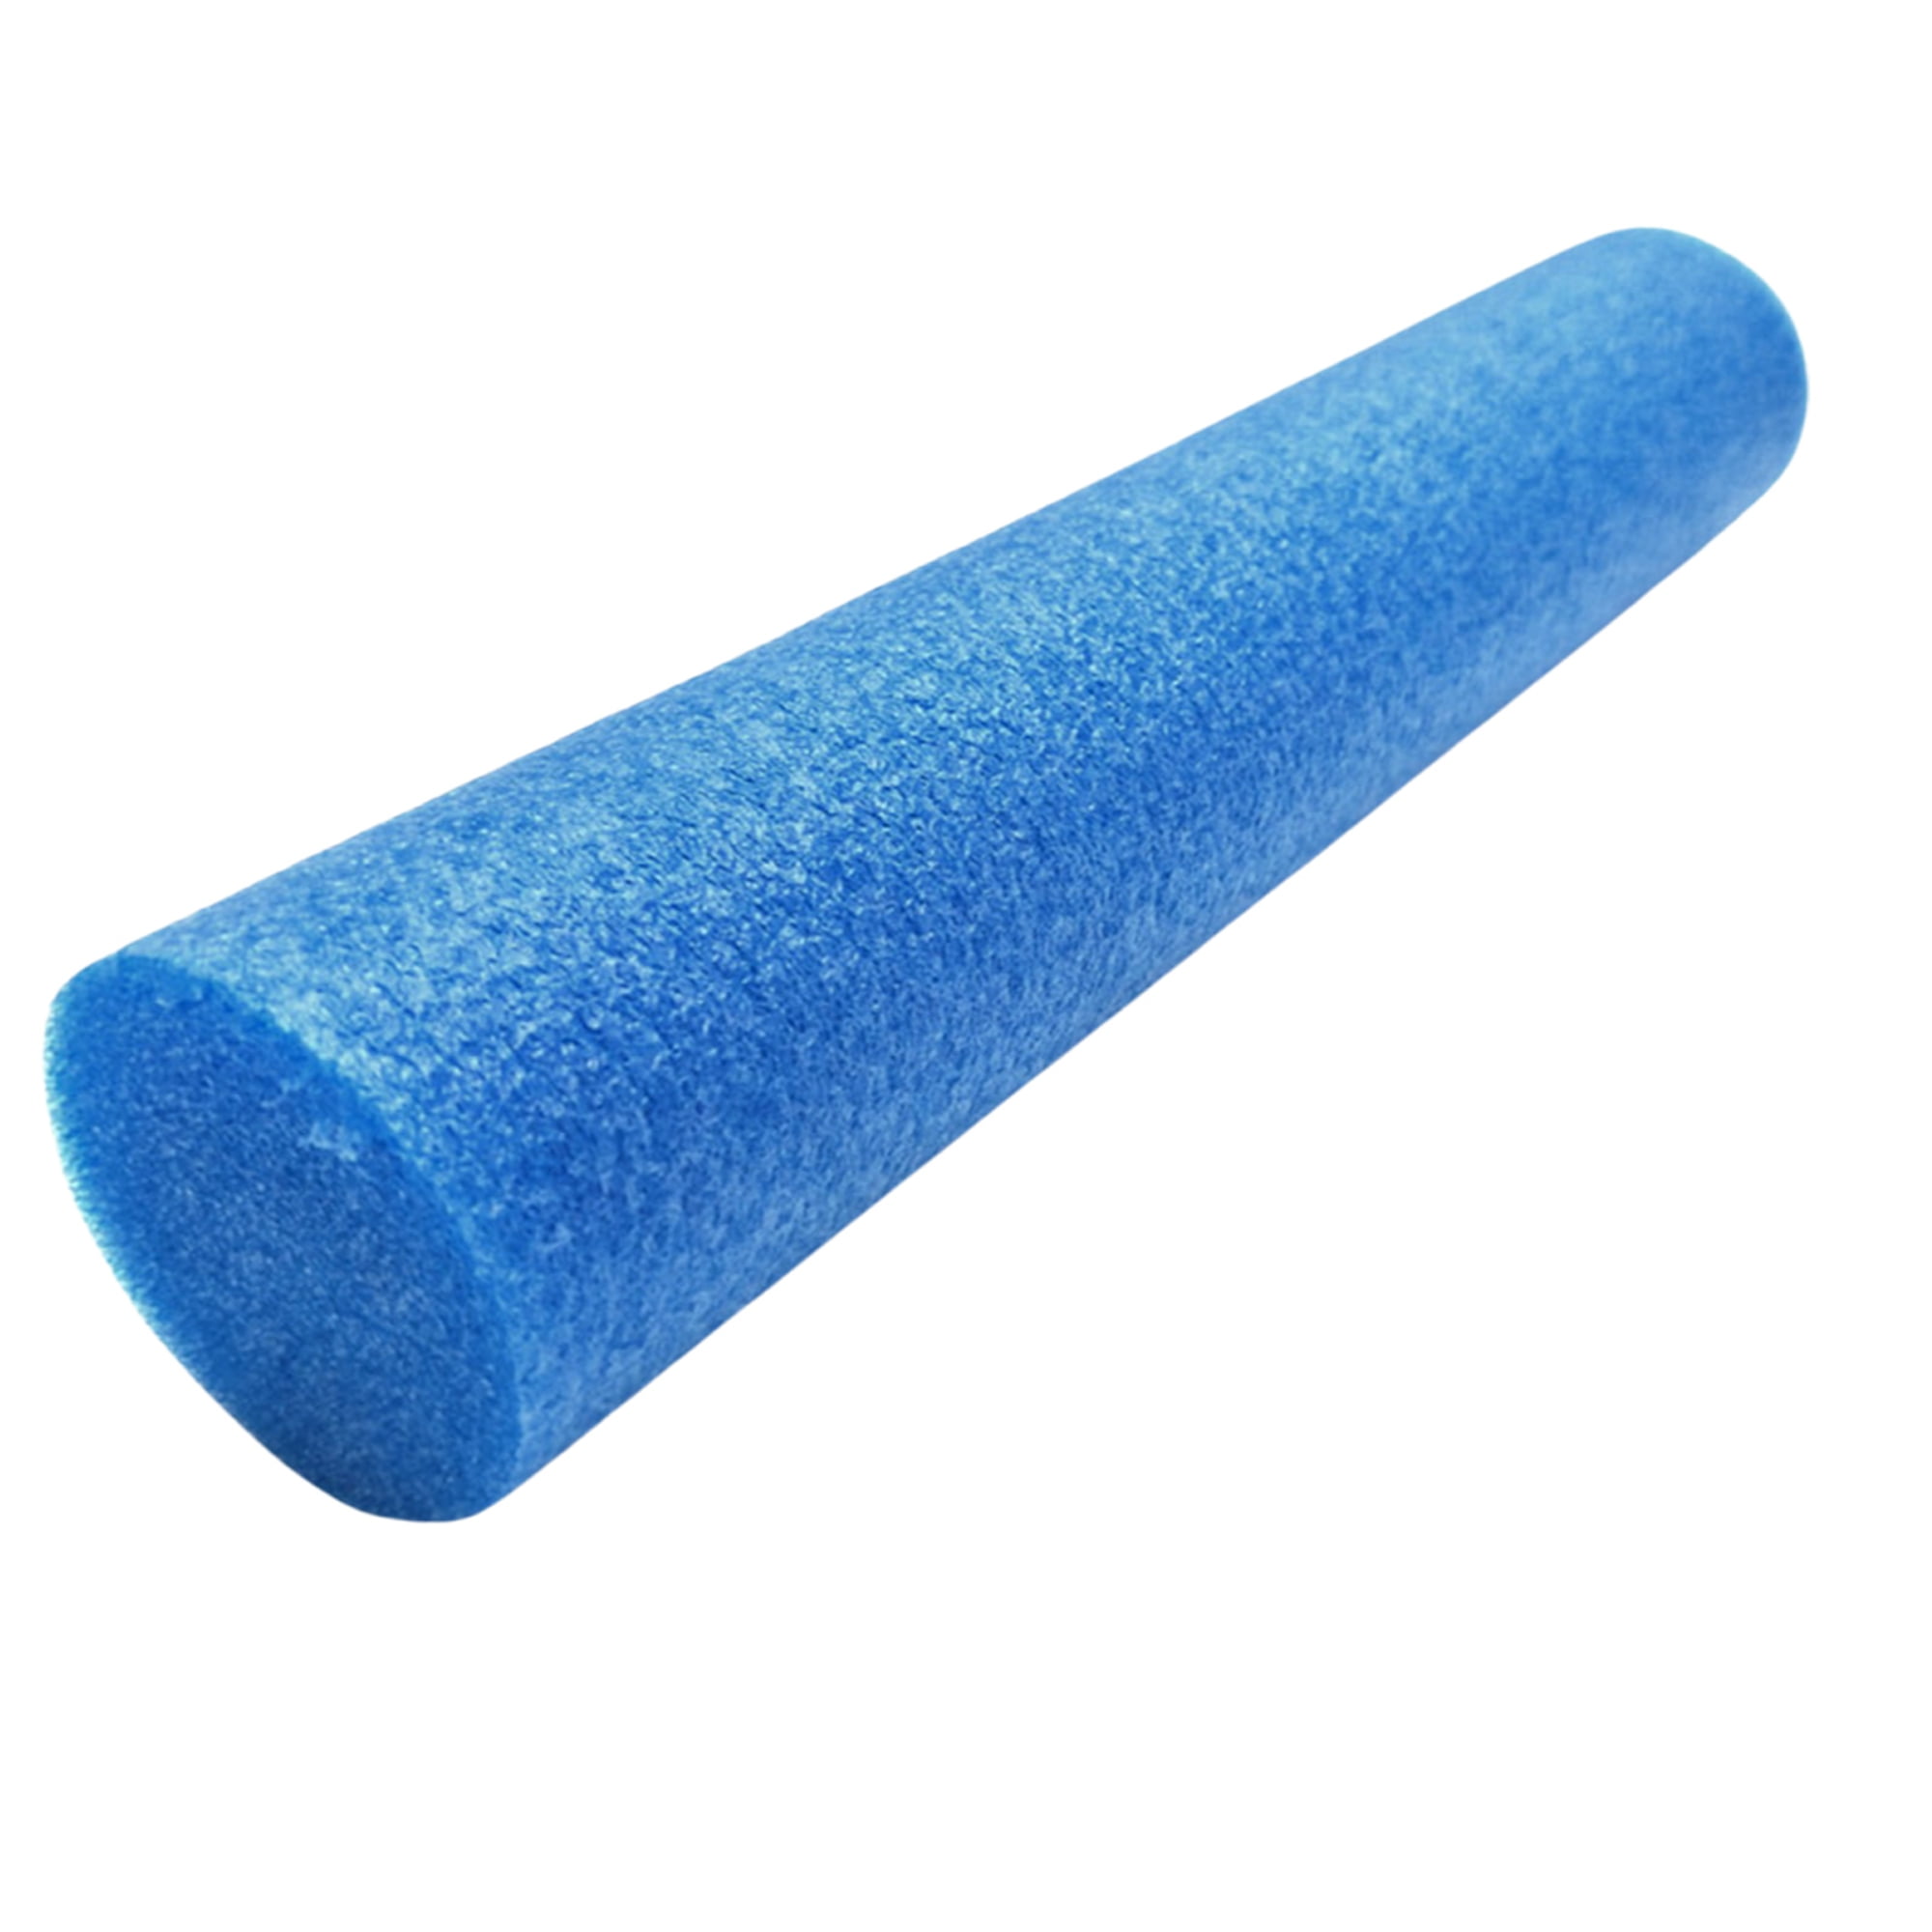 Hollow Foam Pool Swim Noodles Super Thick Noodles for Floating in The Swimming Pool Floating Pool Noodles Foam Tube Assorted Colors Deluxe Foam Pool Swim Noodles 